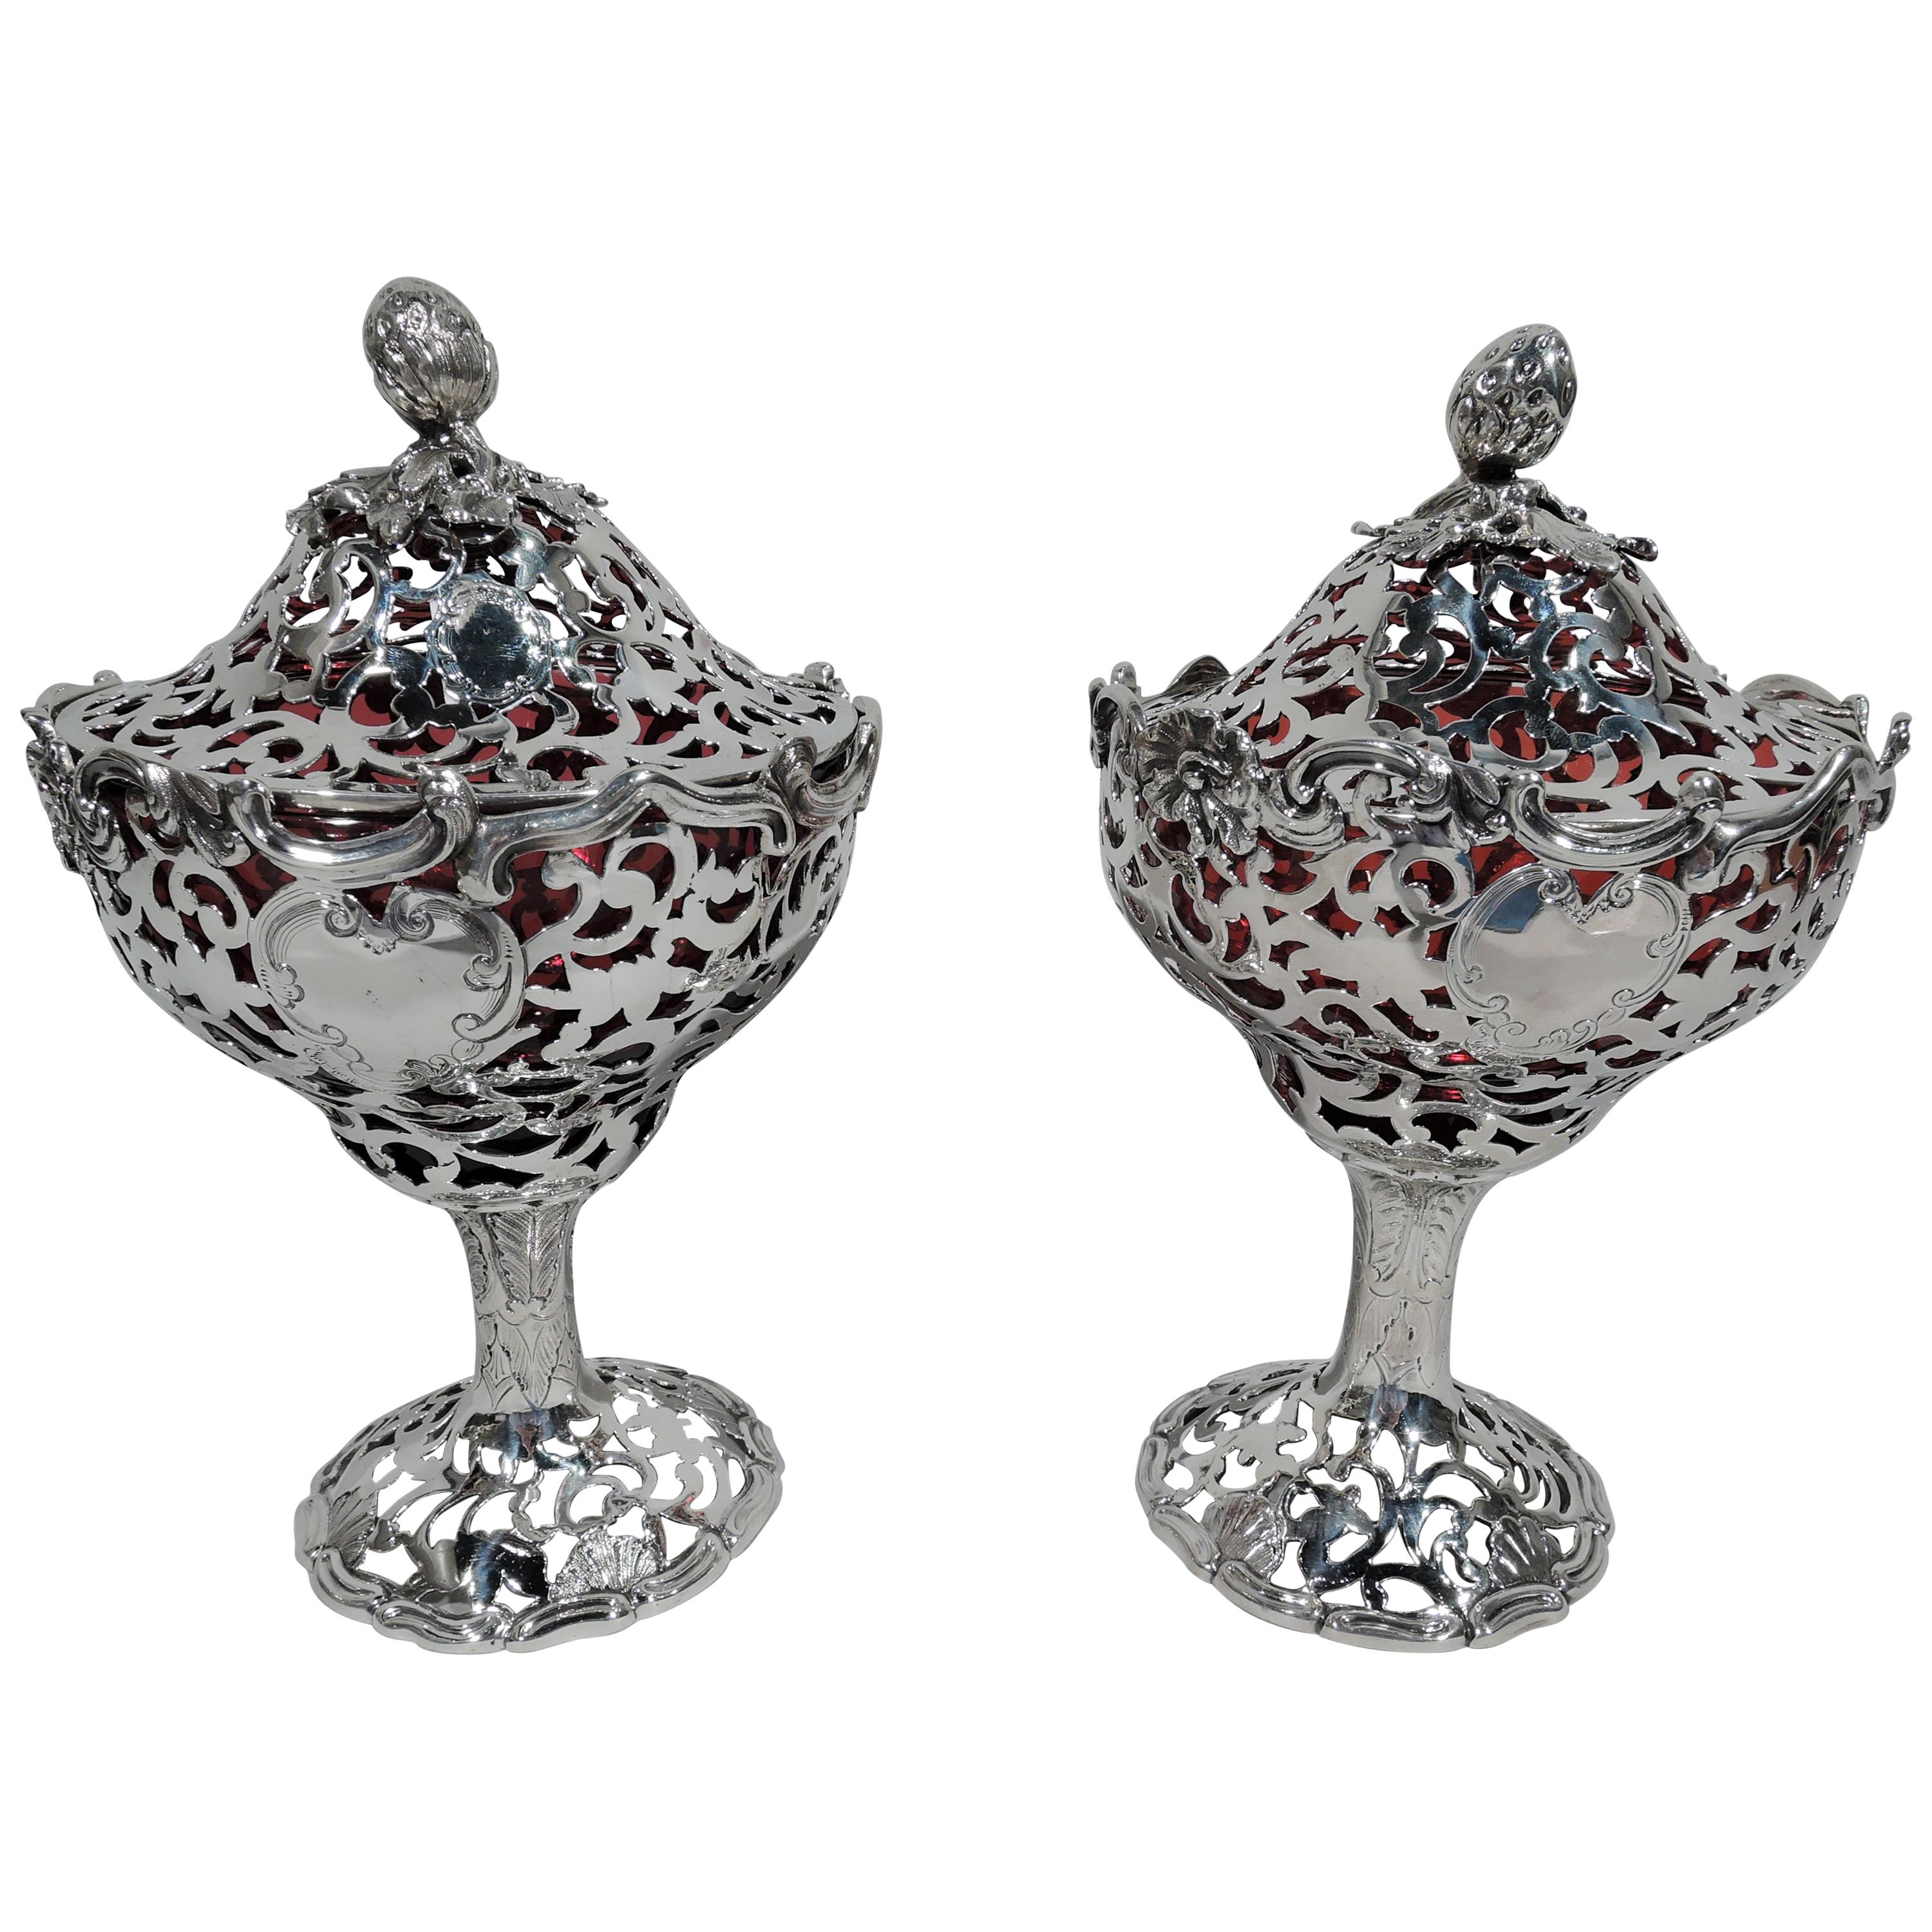 Pair of English Sterling Silver and Red Glass Strawberry Jam Compotes